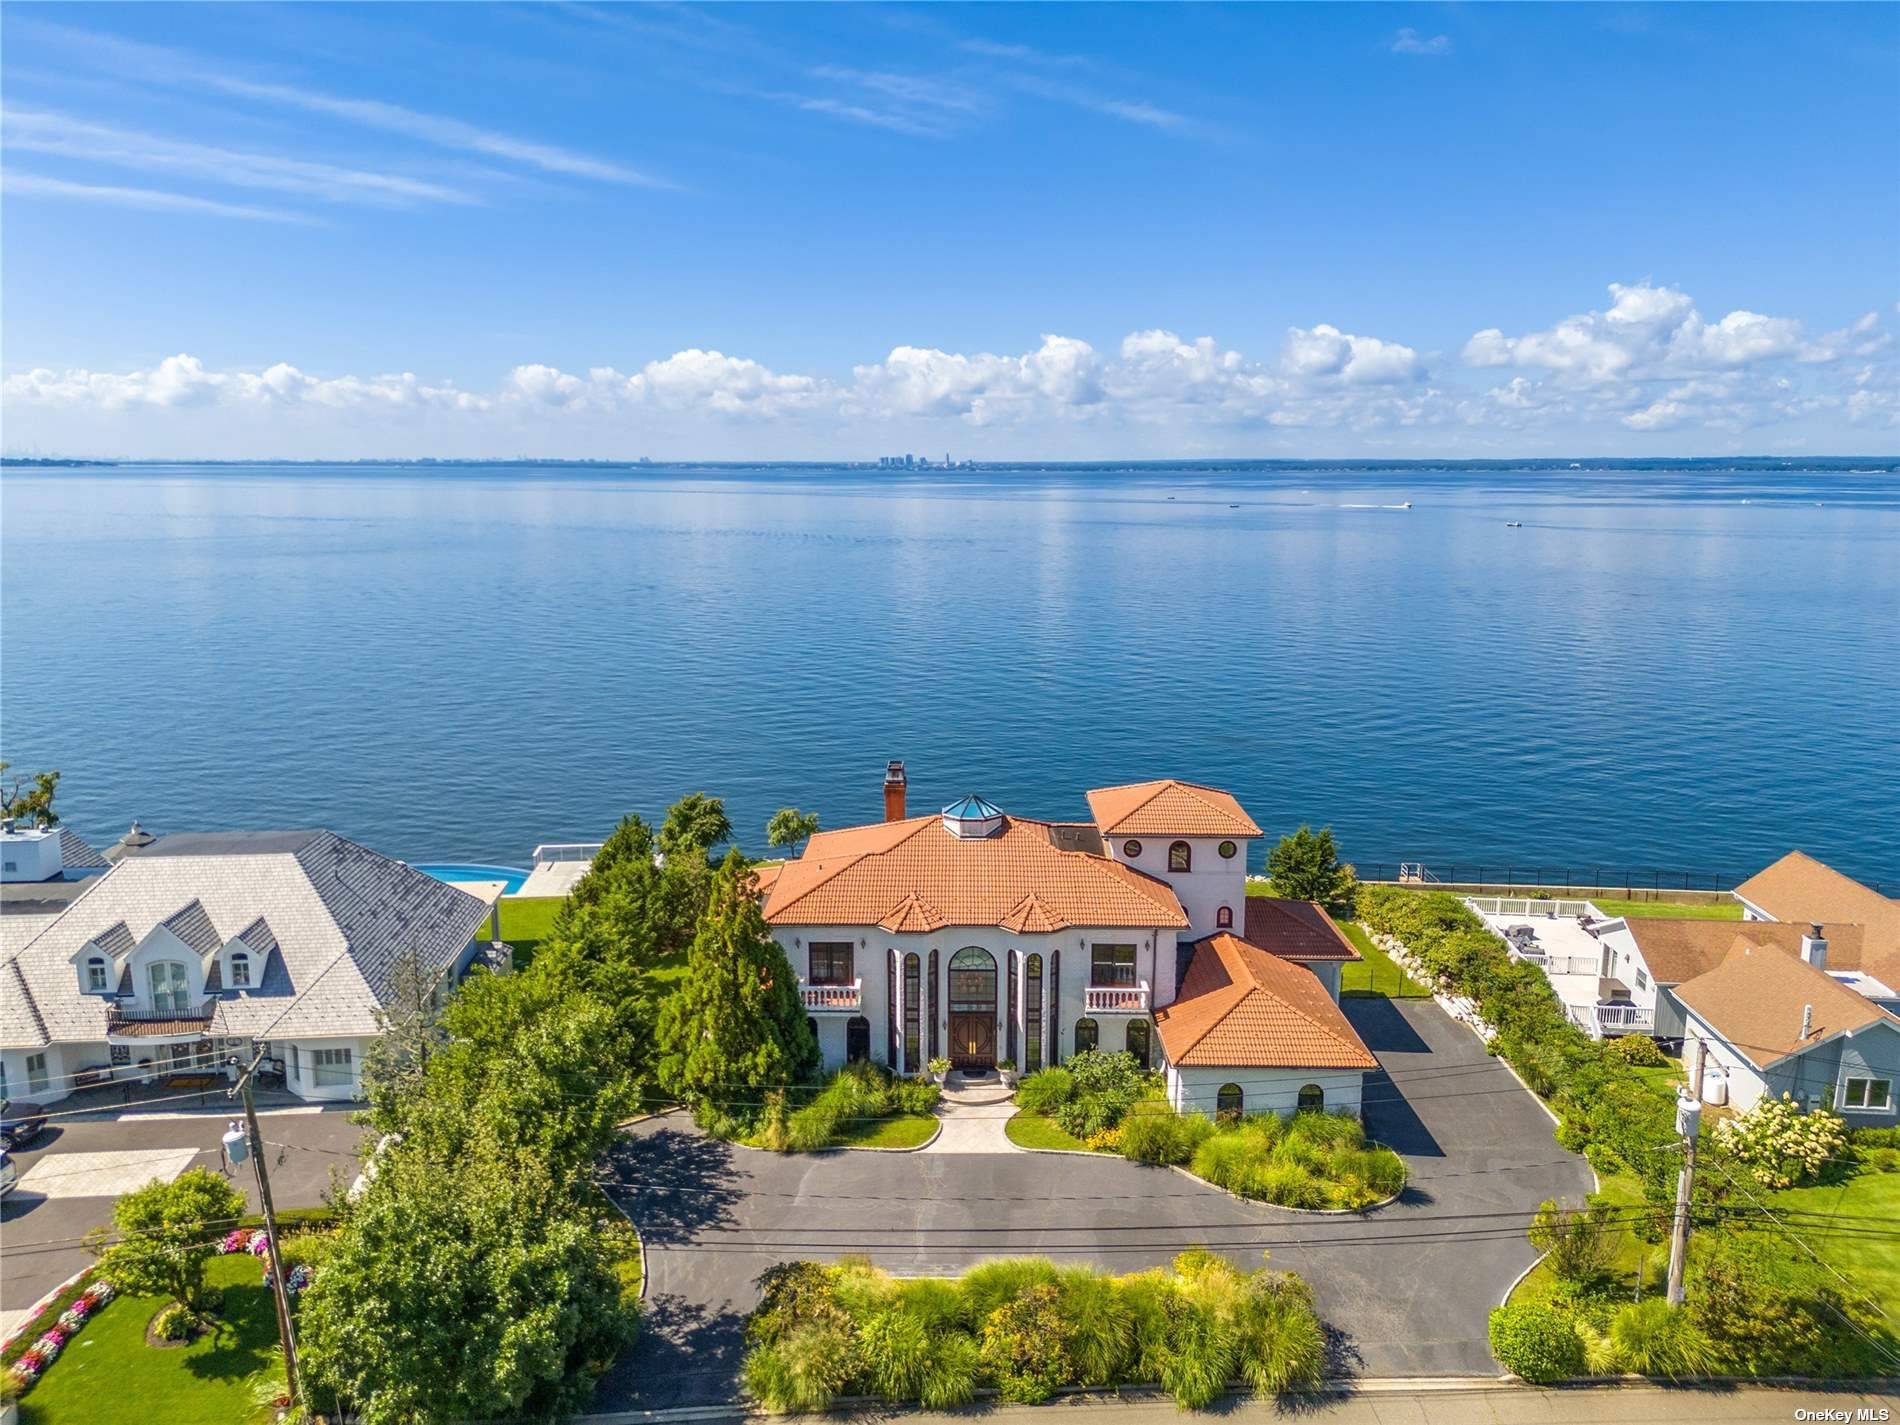 Embrace the allure of island living in this elegant custom built waterfront gem.